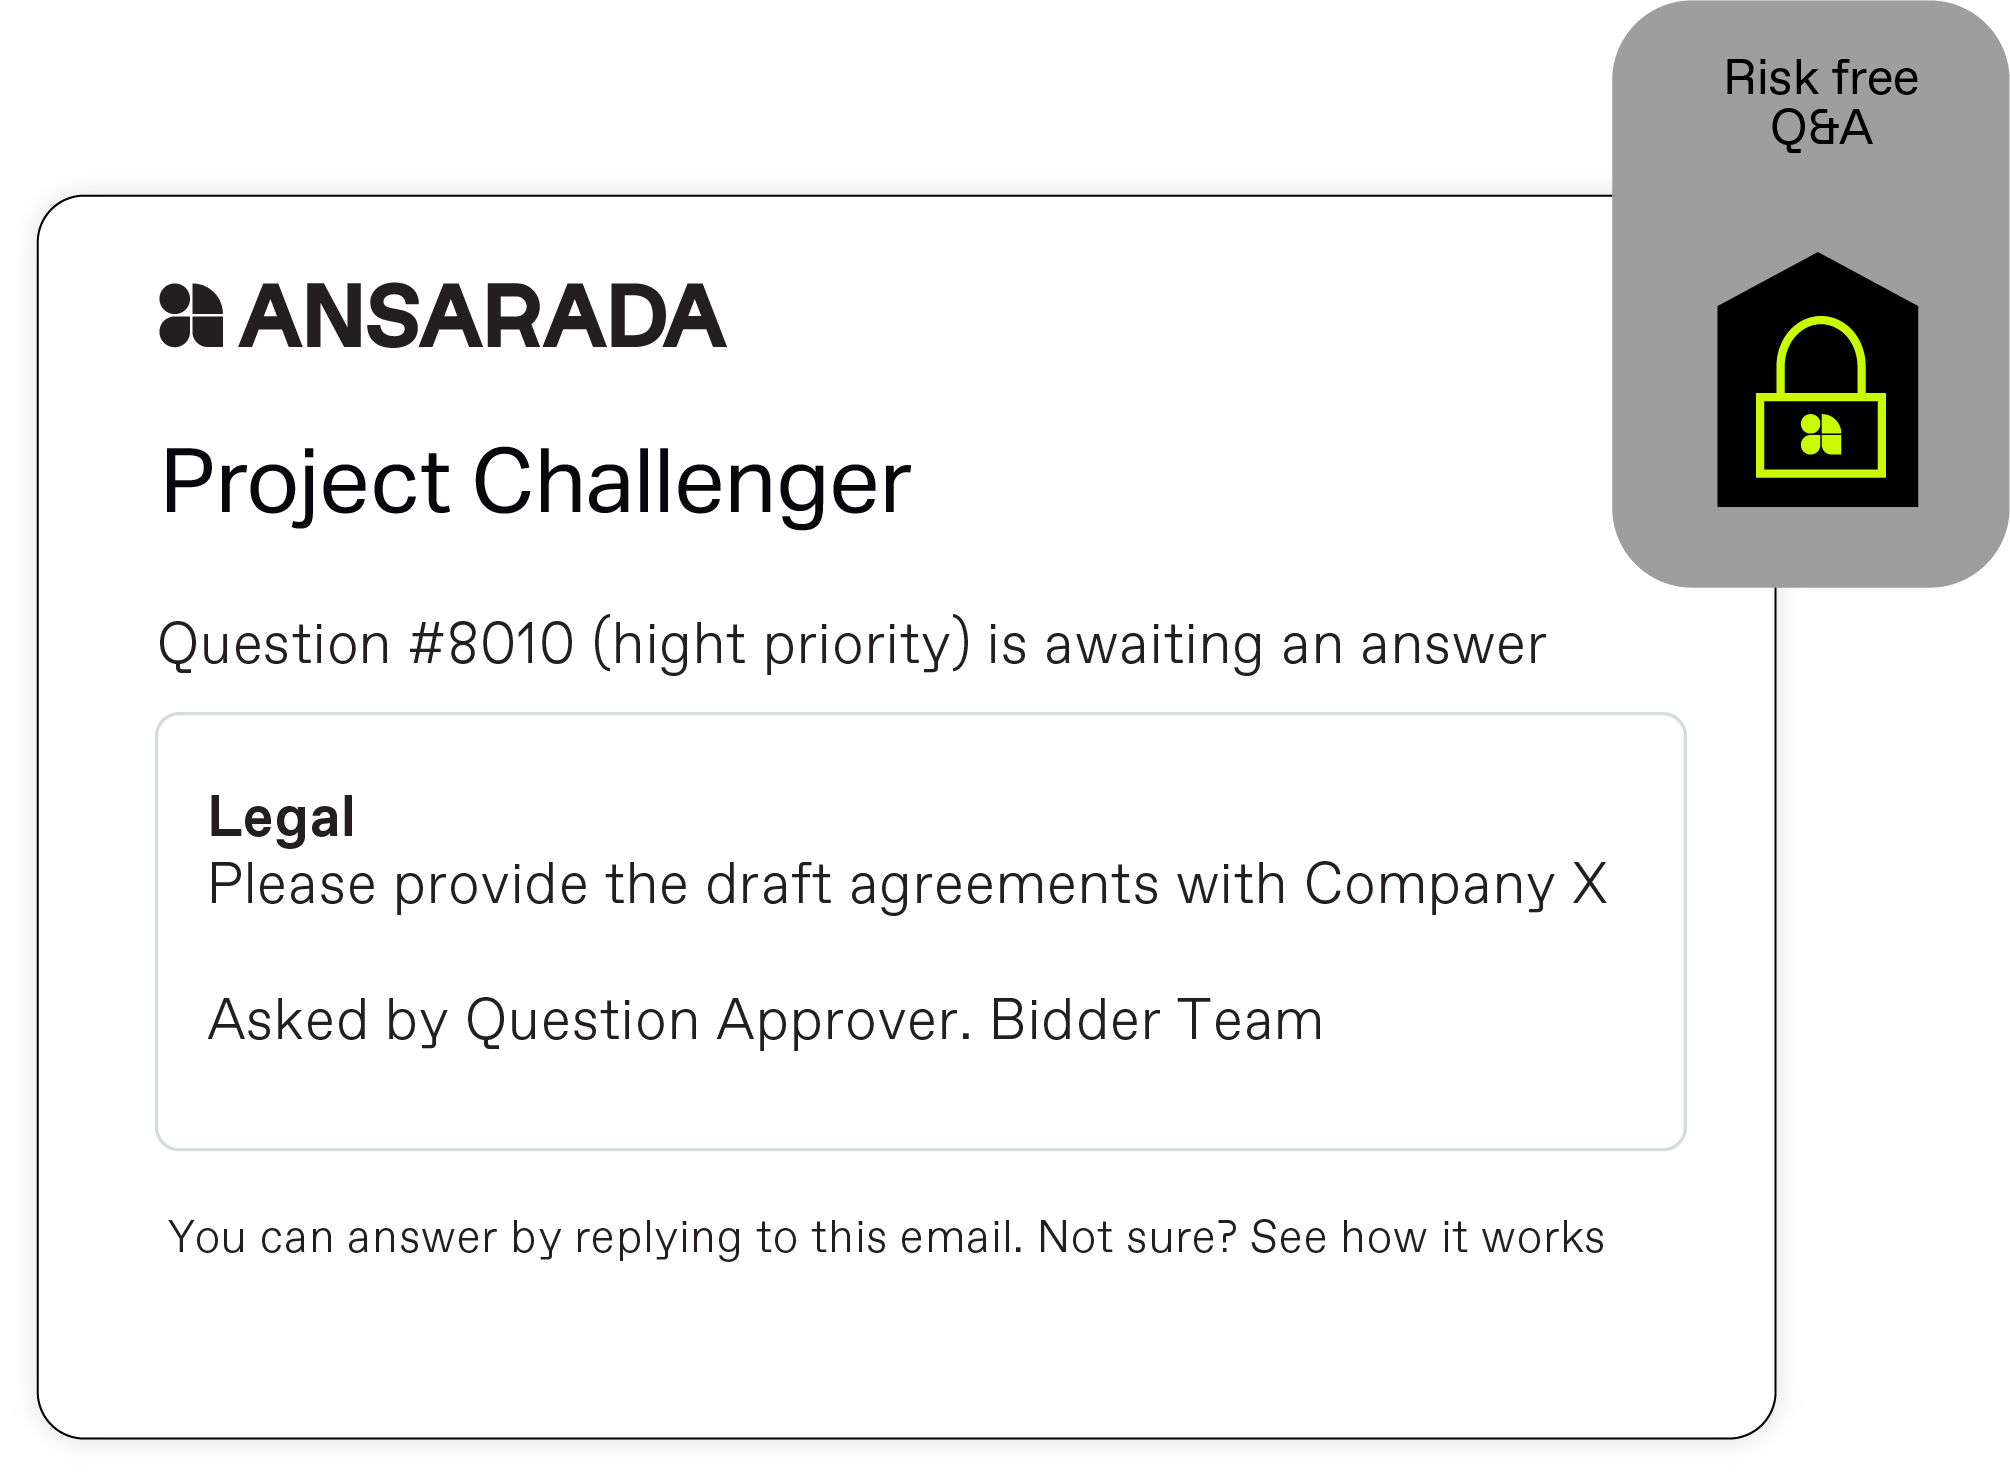 Ansarada Q&A and reporting email